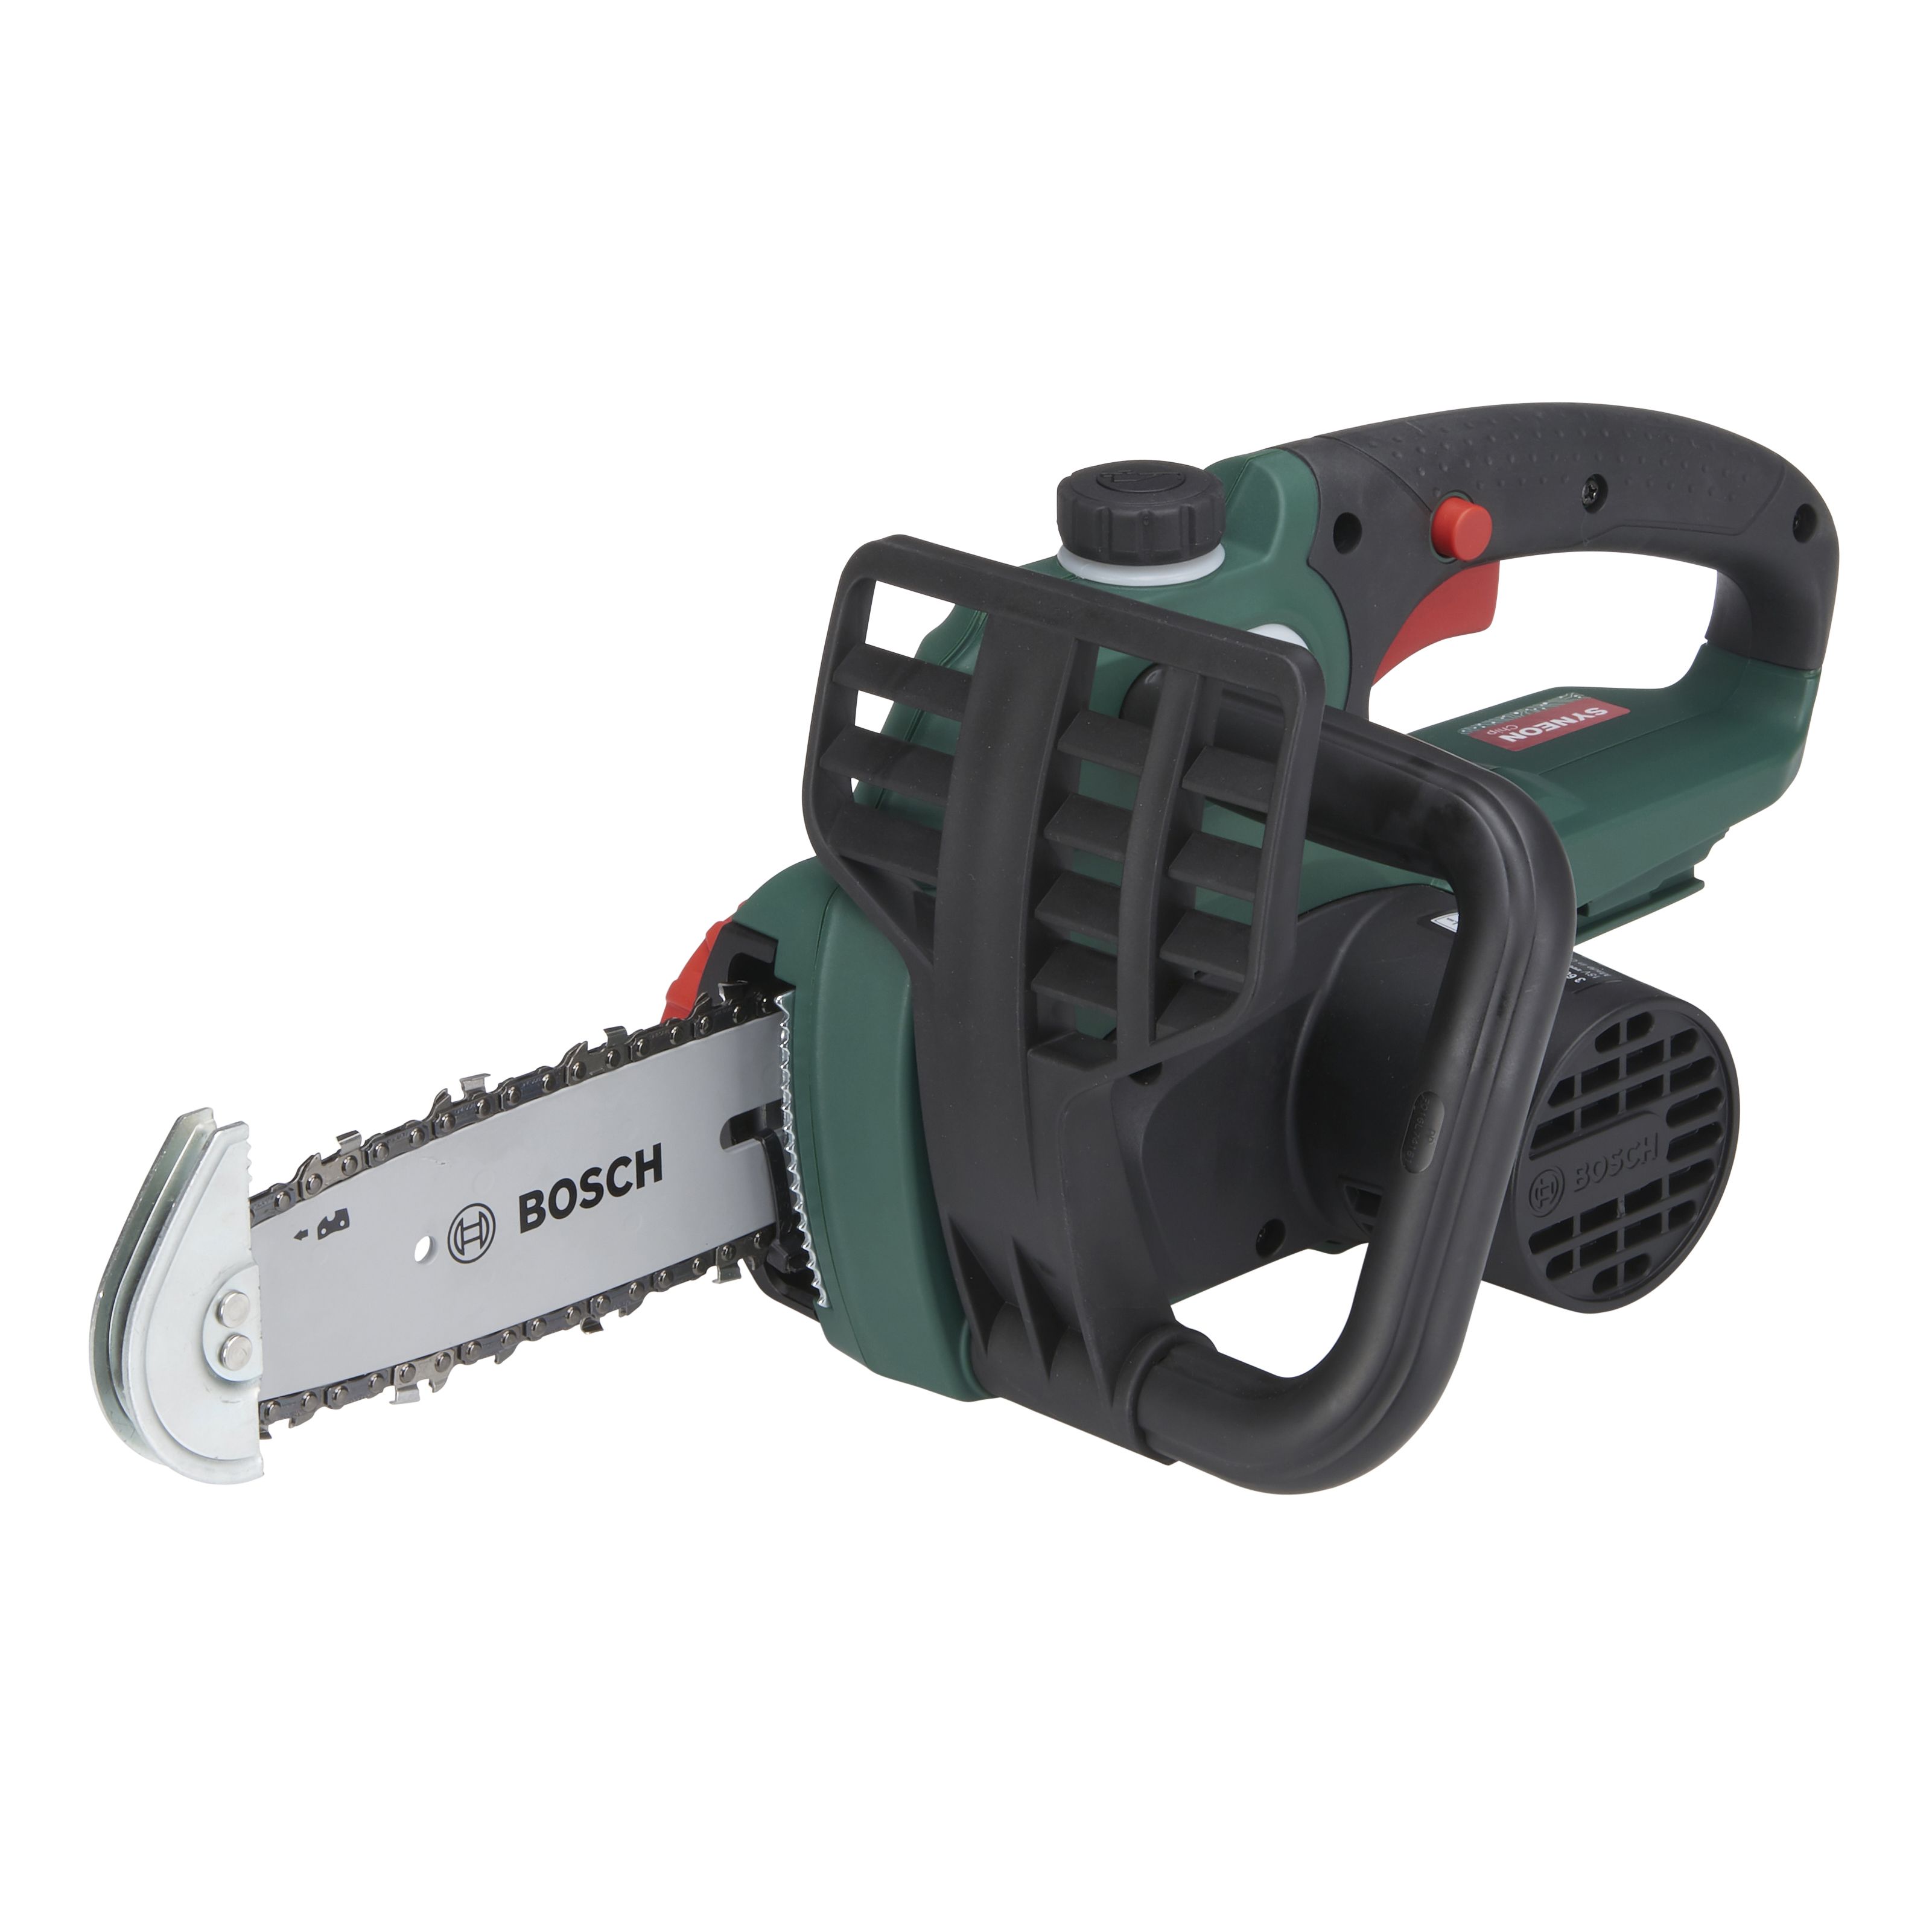 Bosch Power for all Cordless Chainsaw